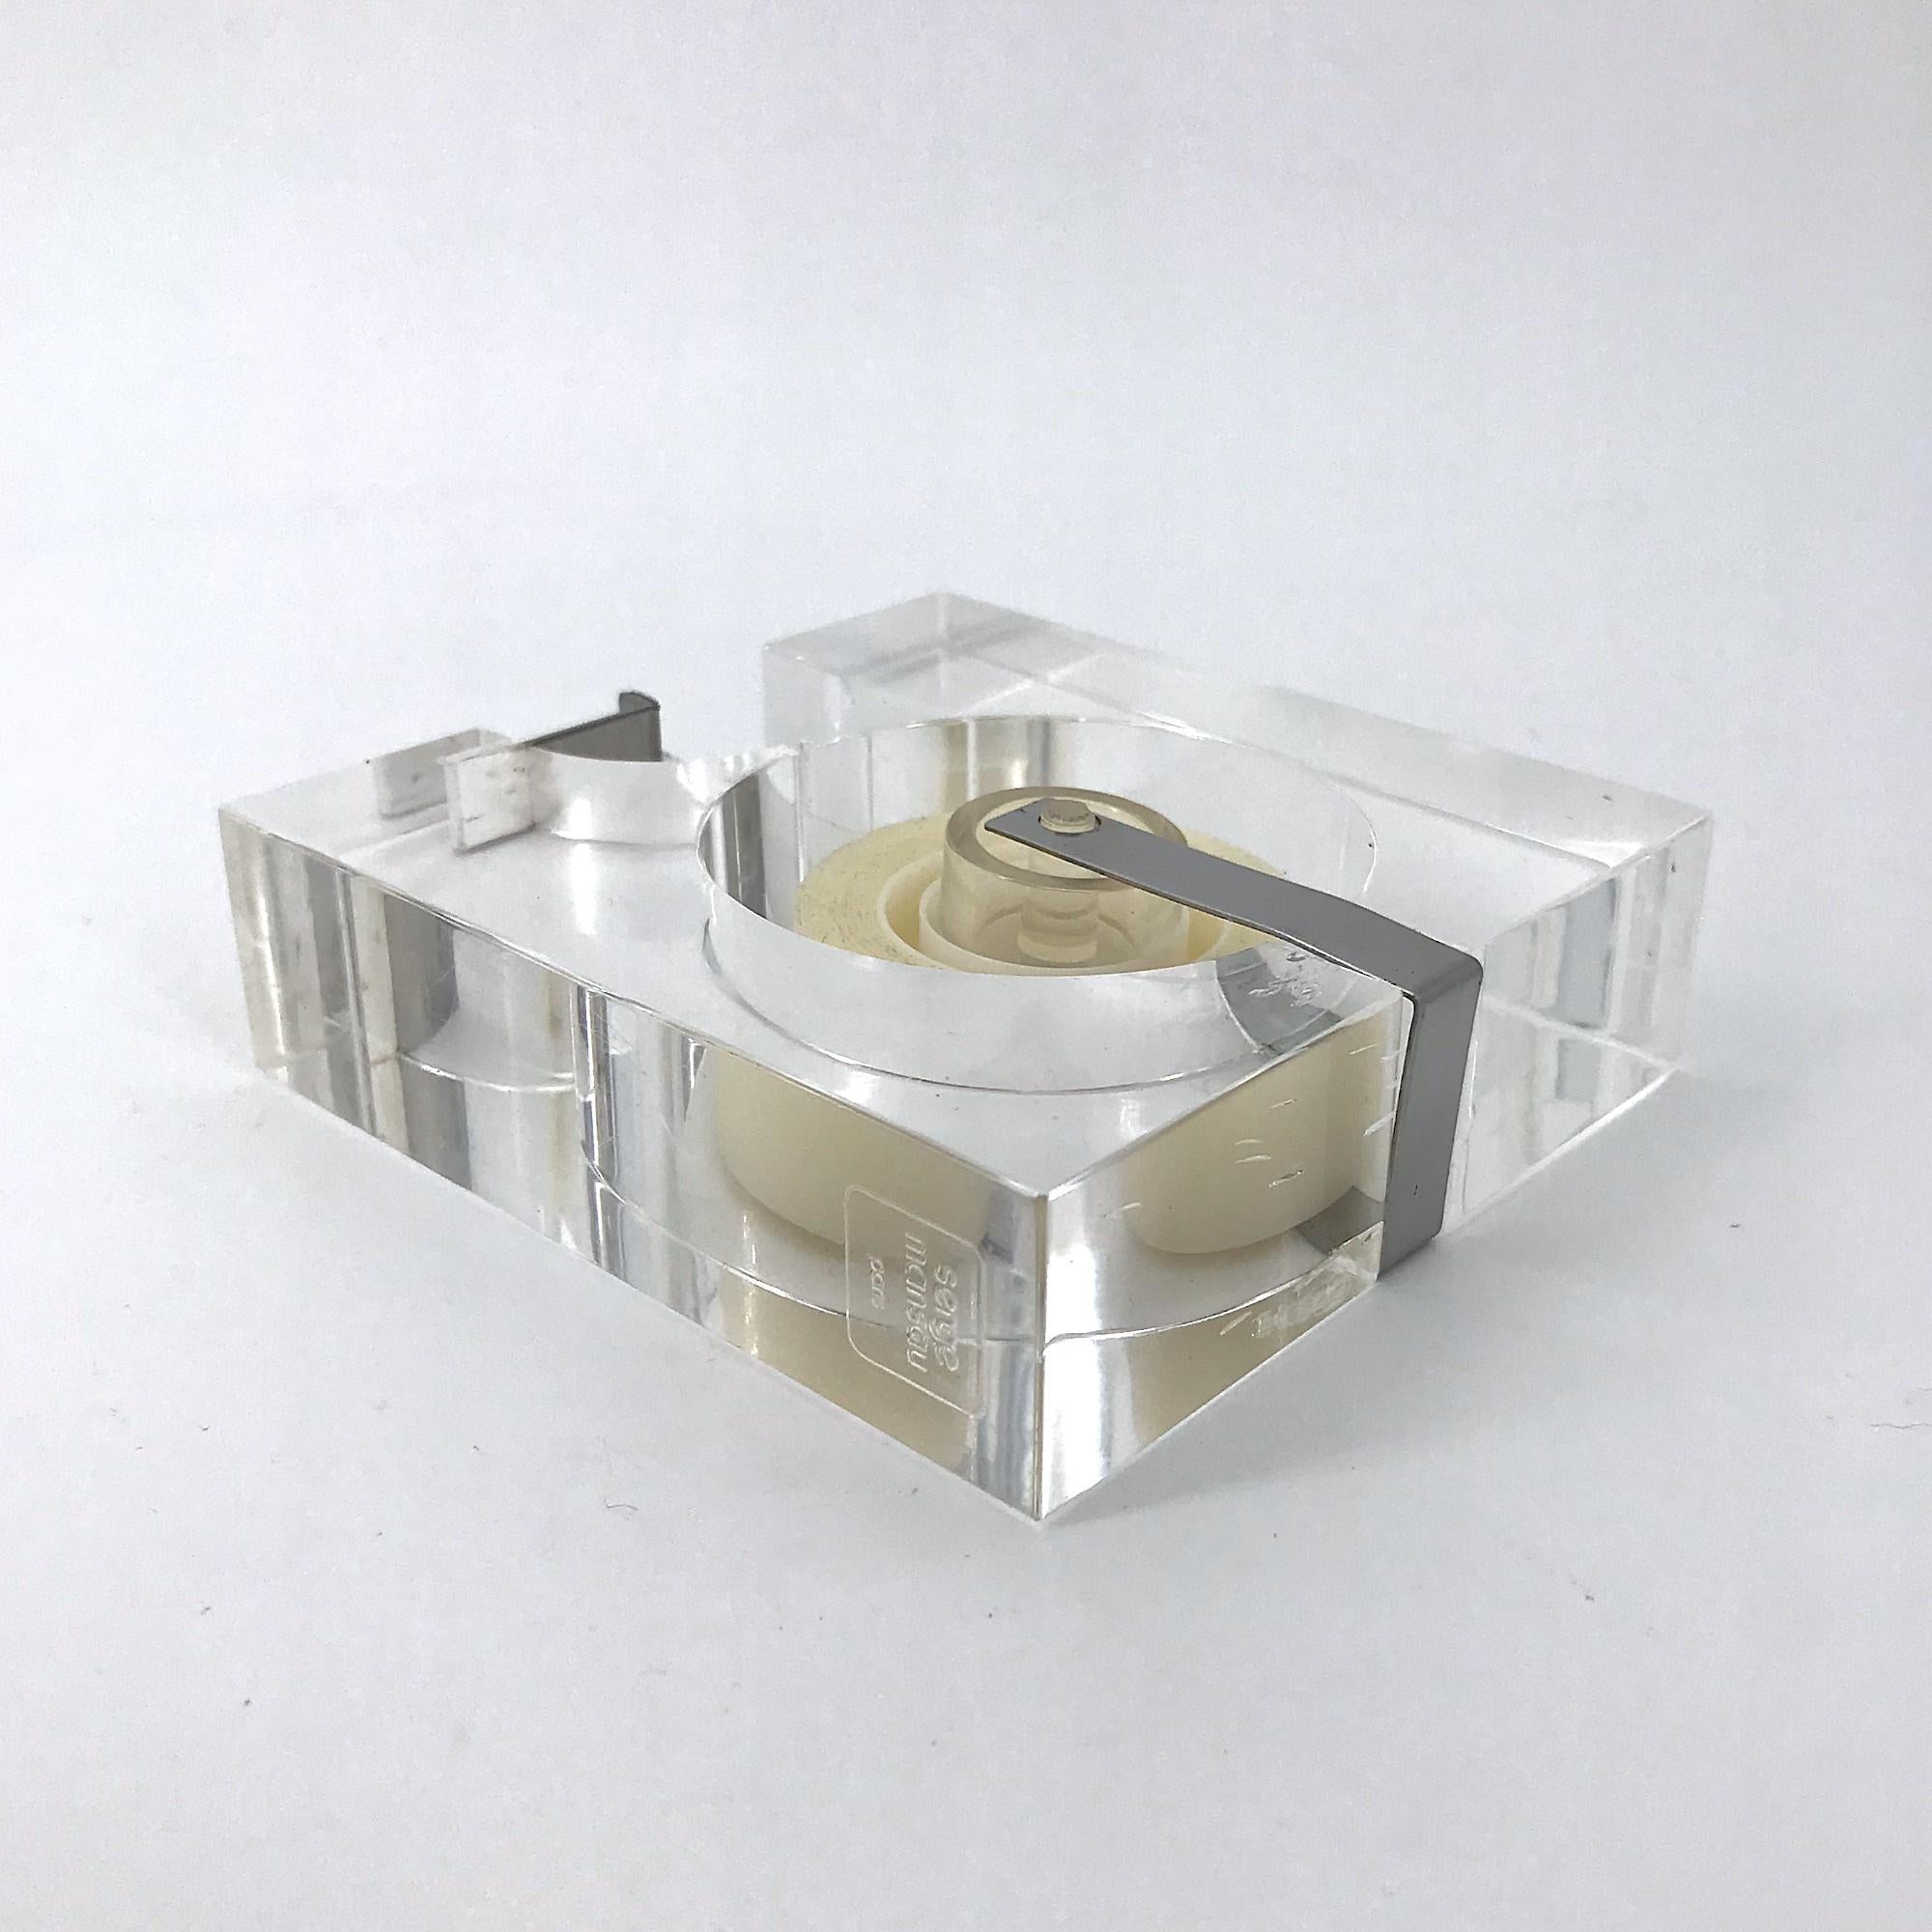 1970s Lucite Tape Dispenser by Two's Company for Serge Mansau Paris MOMA Design In Good Condition In Hyattsville, MD